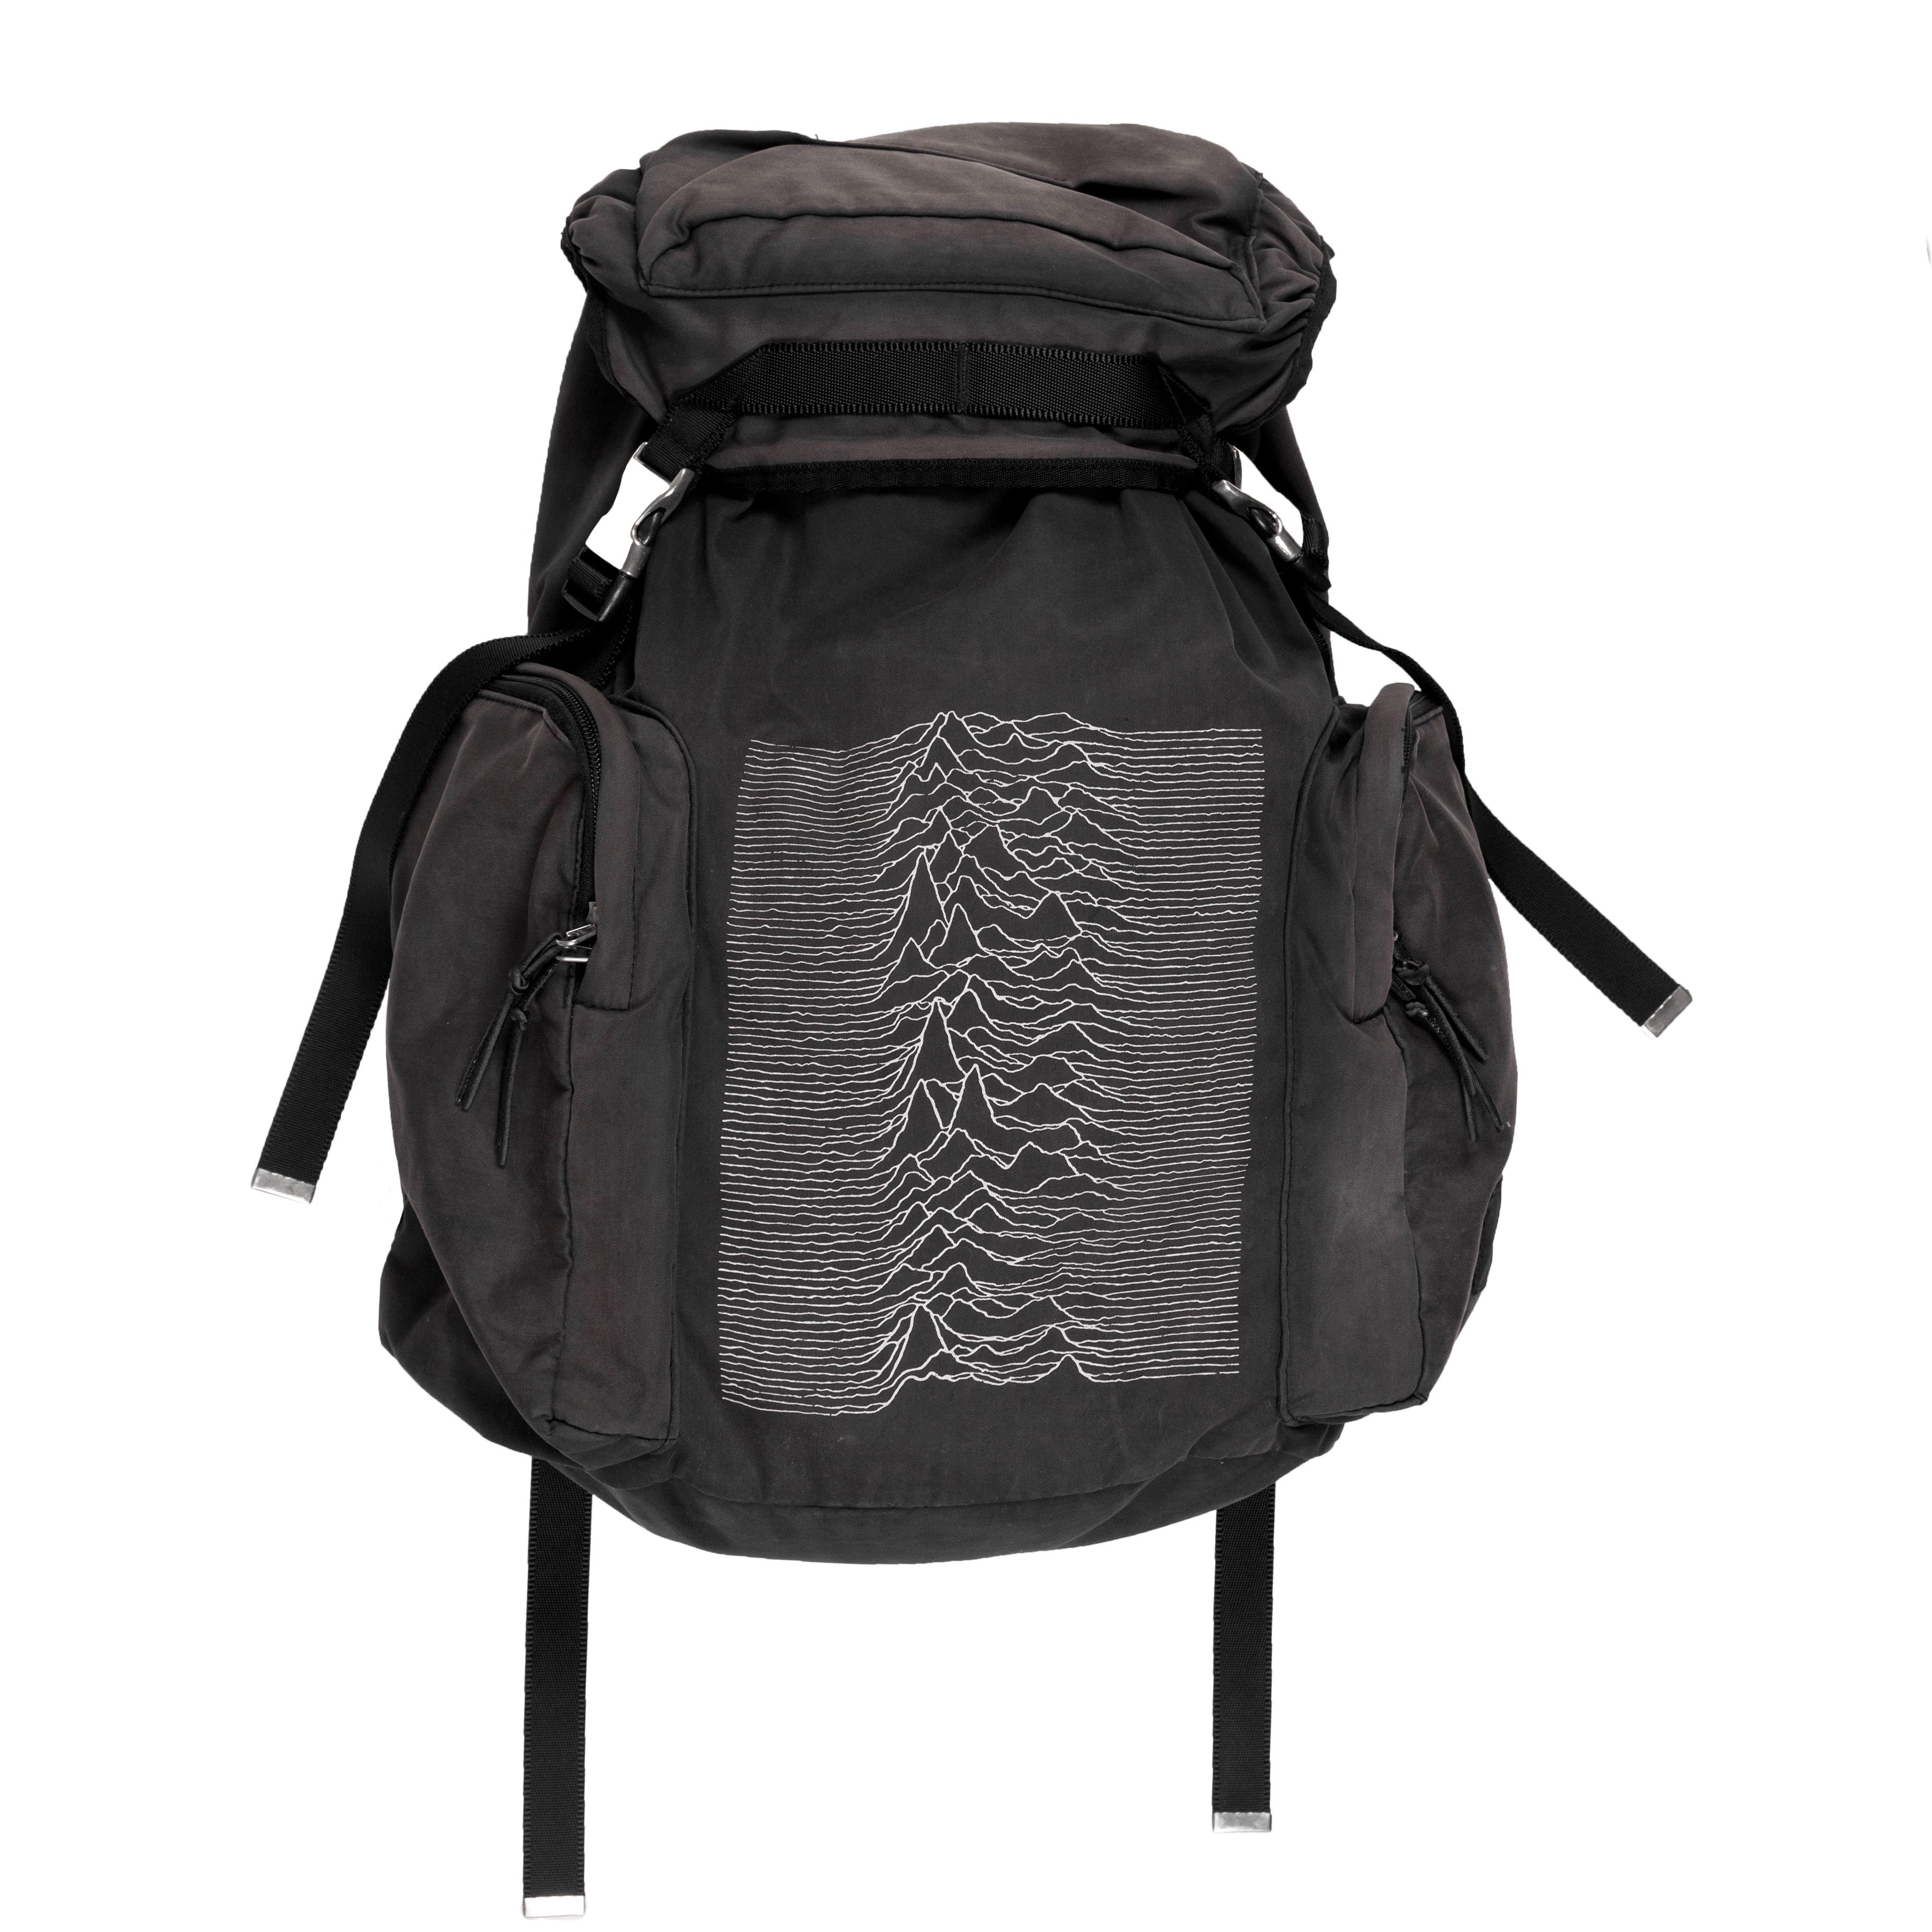 Undercover “Unknown Pleasures” Nylon Backpack - AW09 “Earmuff